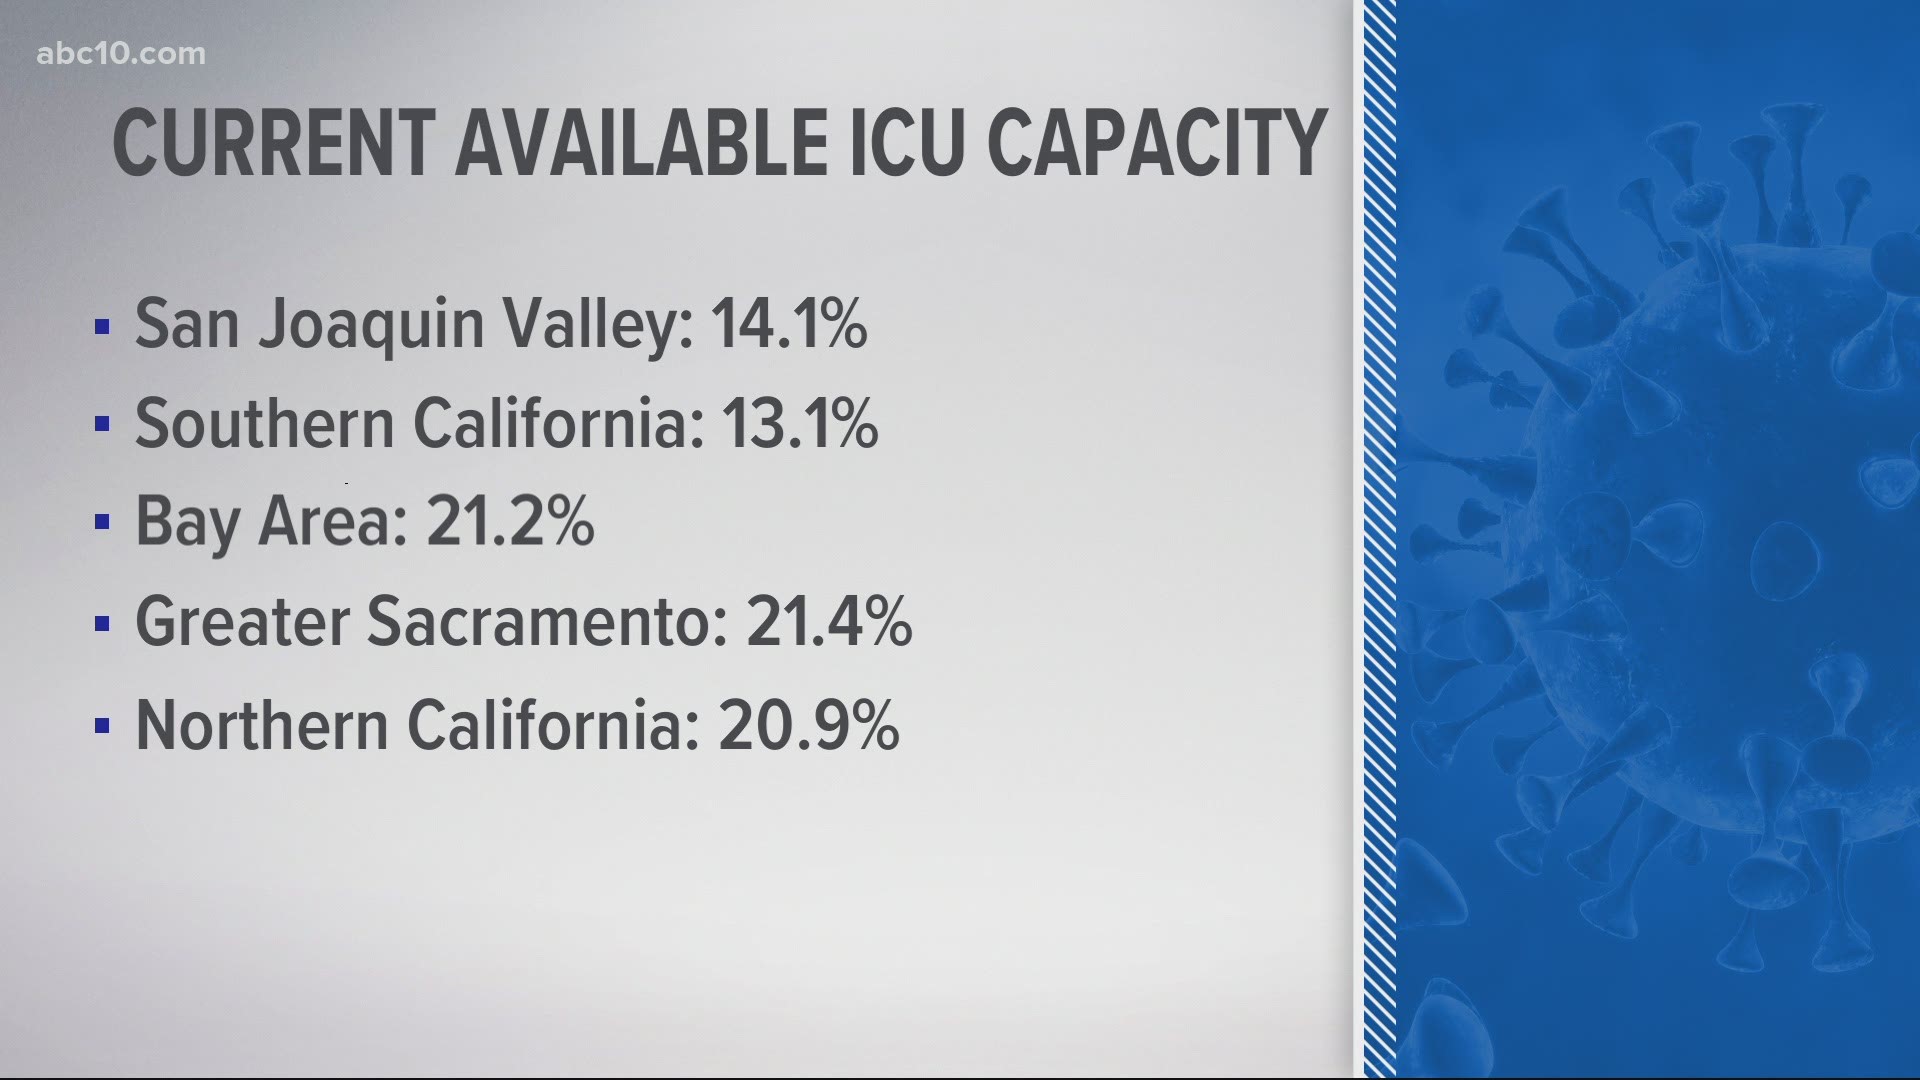 The San Joaquin Valley and Southern California regions could move ahead with stay-at-home orders after the ICU bed availability dropped below 15% in each area.